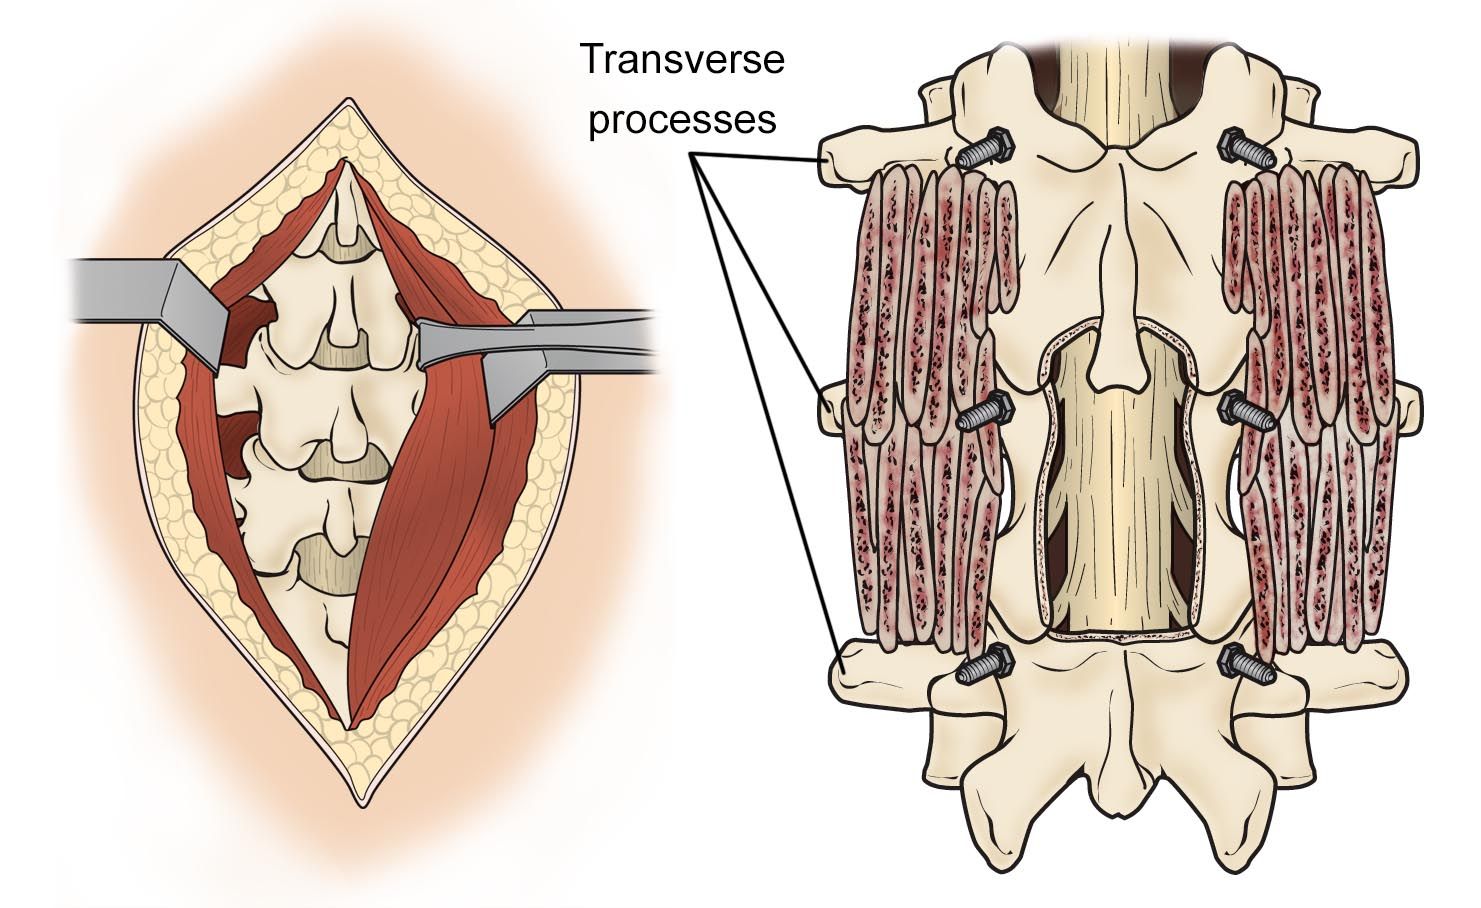 lumbar spine decompression and bone graft placement